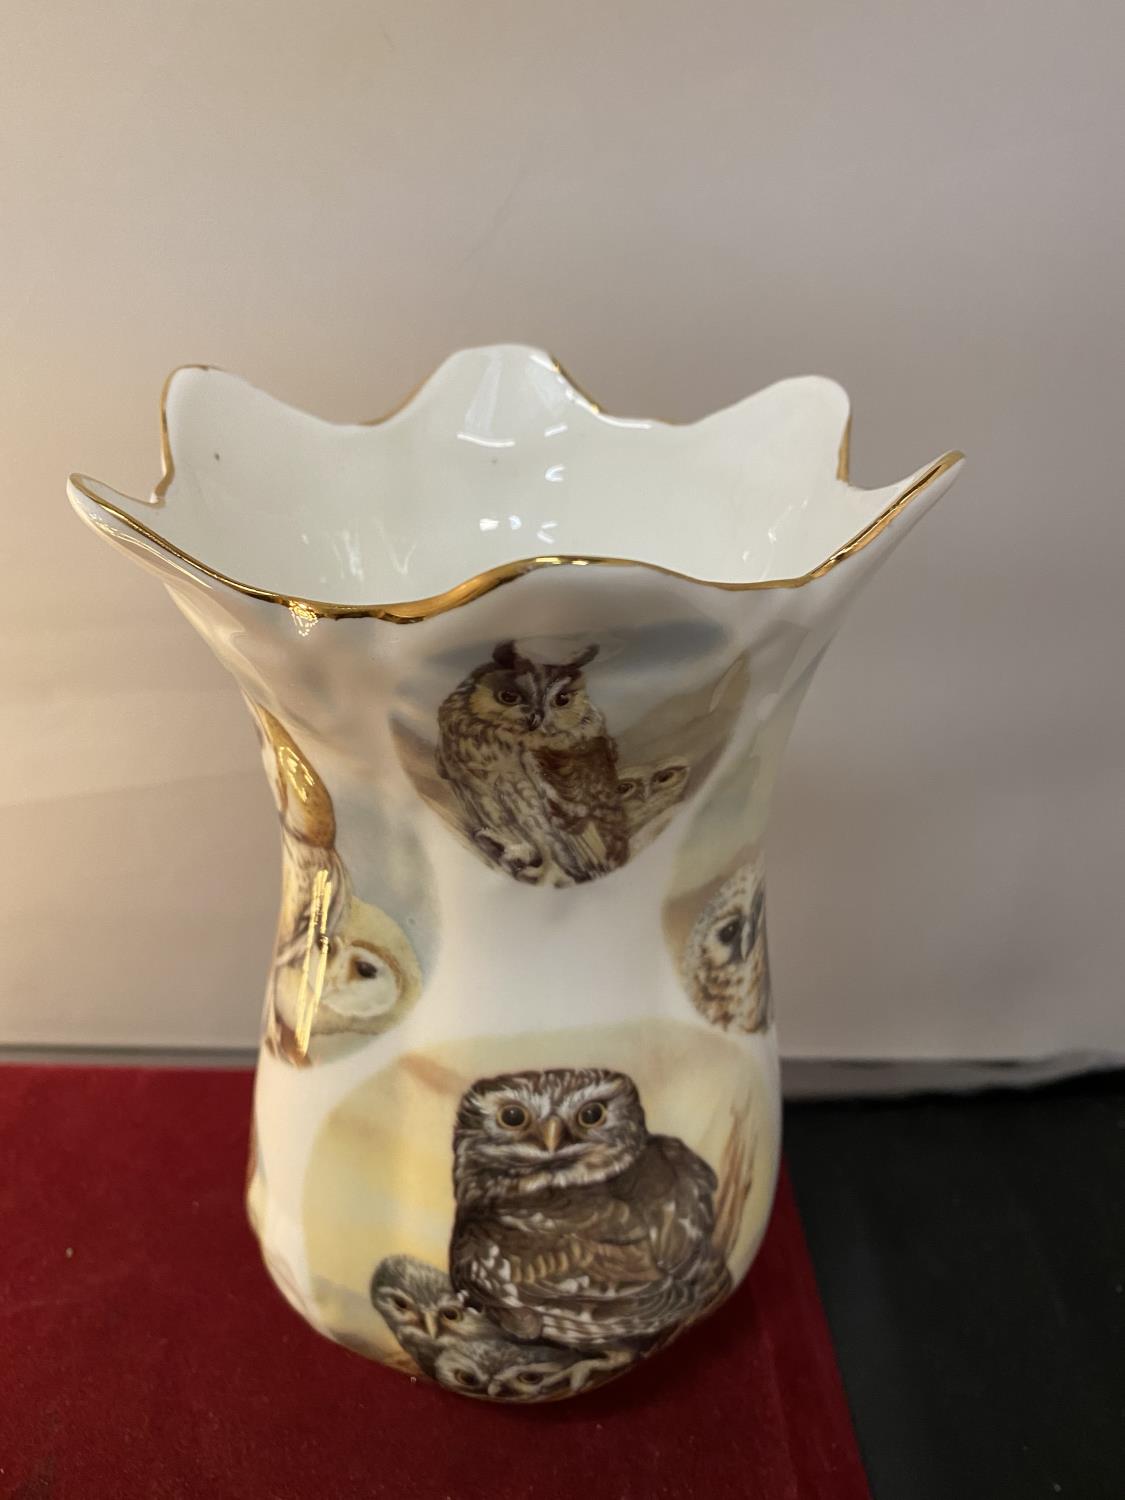 VARIOUS OWL COLLECTION ITEMS TO INLCUDE A LIGHT, A VASE, PLANT POT, FIVE OWLS ON A WOODEN PLINTH AND - Image 5 of 8